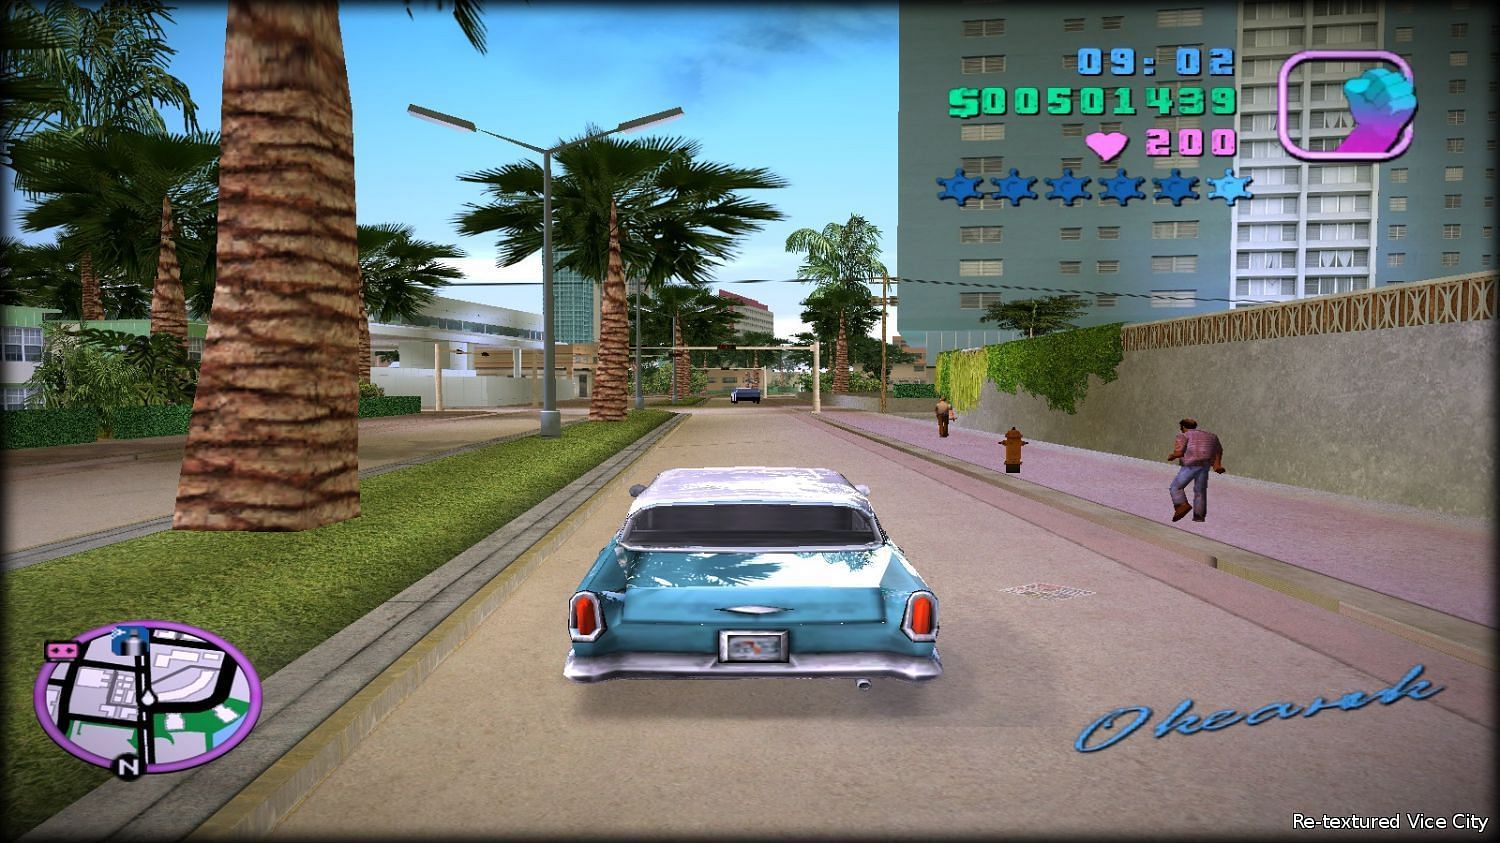 GTA San Andreas, Vice City remasters free to download and play now